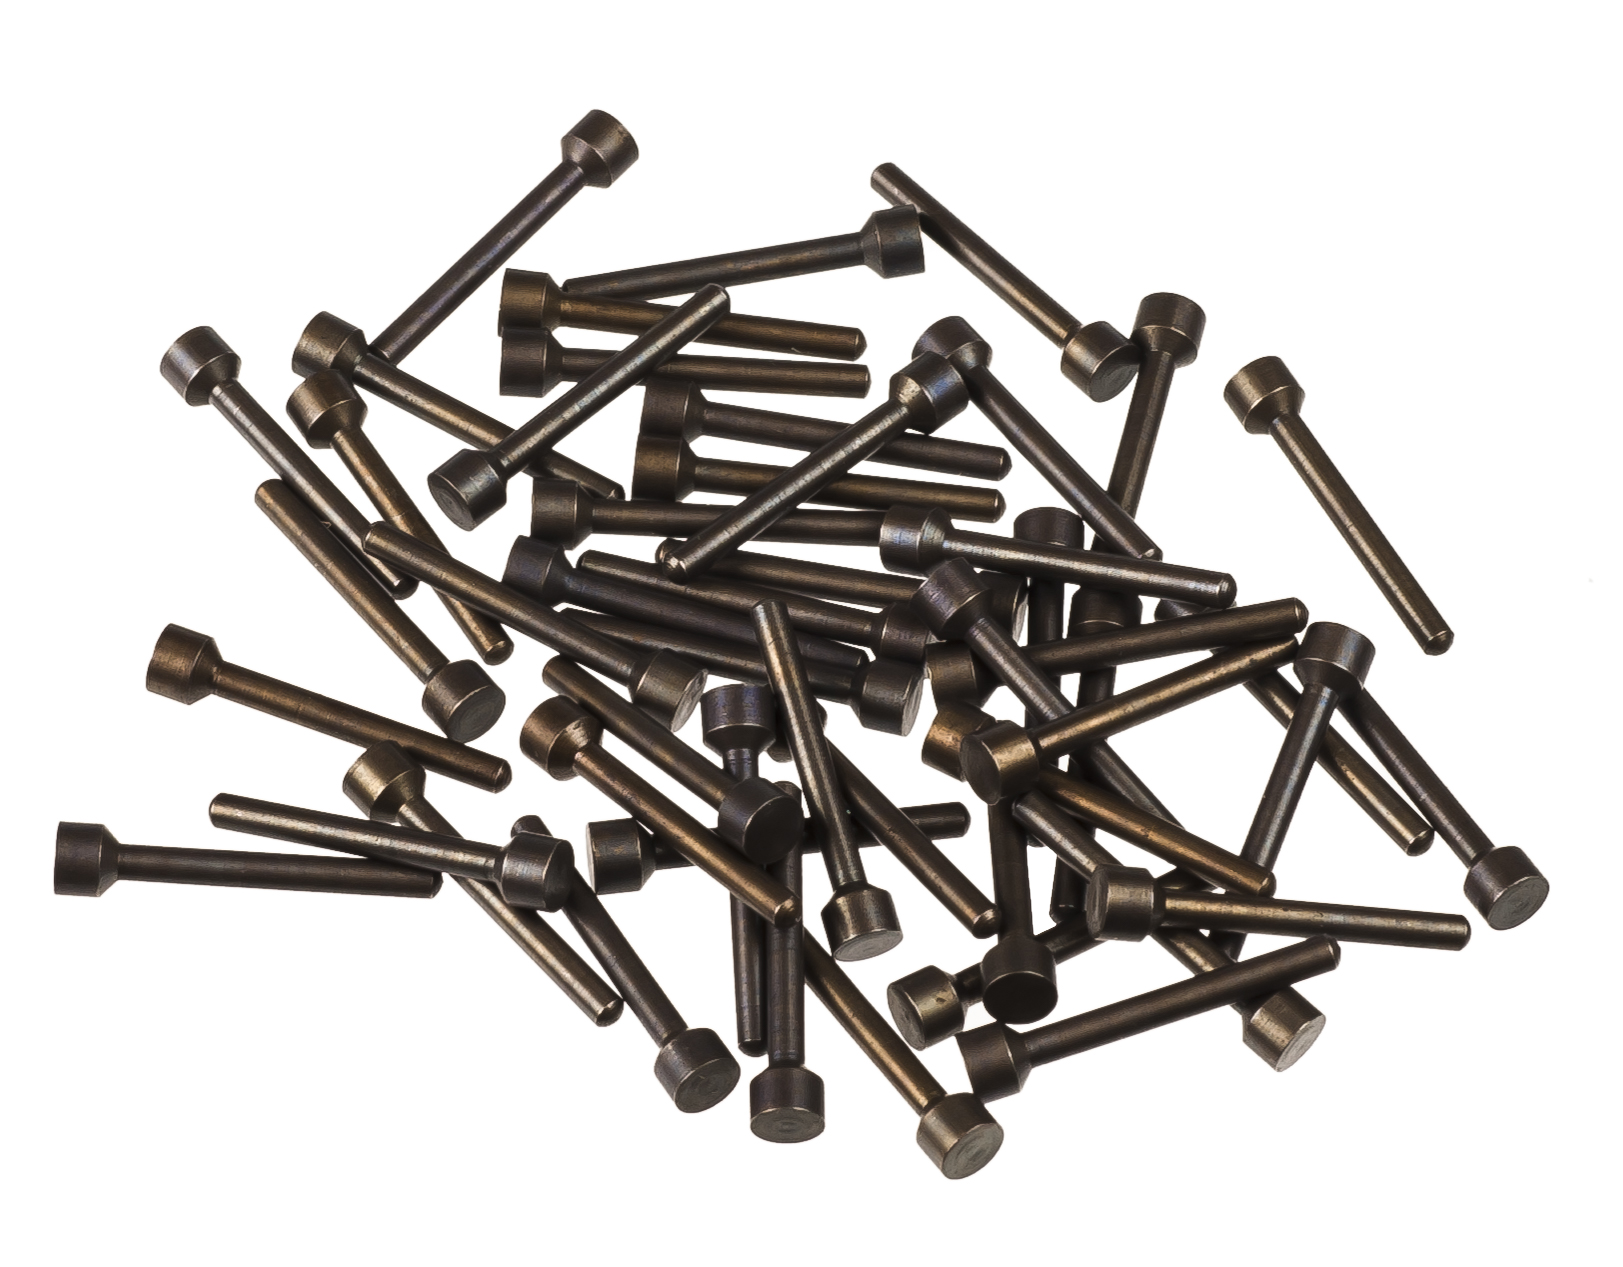 RCBS Headed Decapping Pins Large 50pk 49630 for sale online 